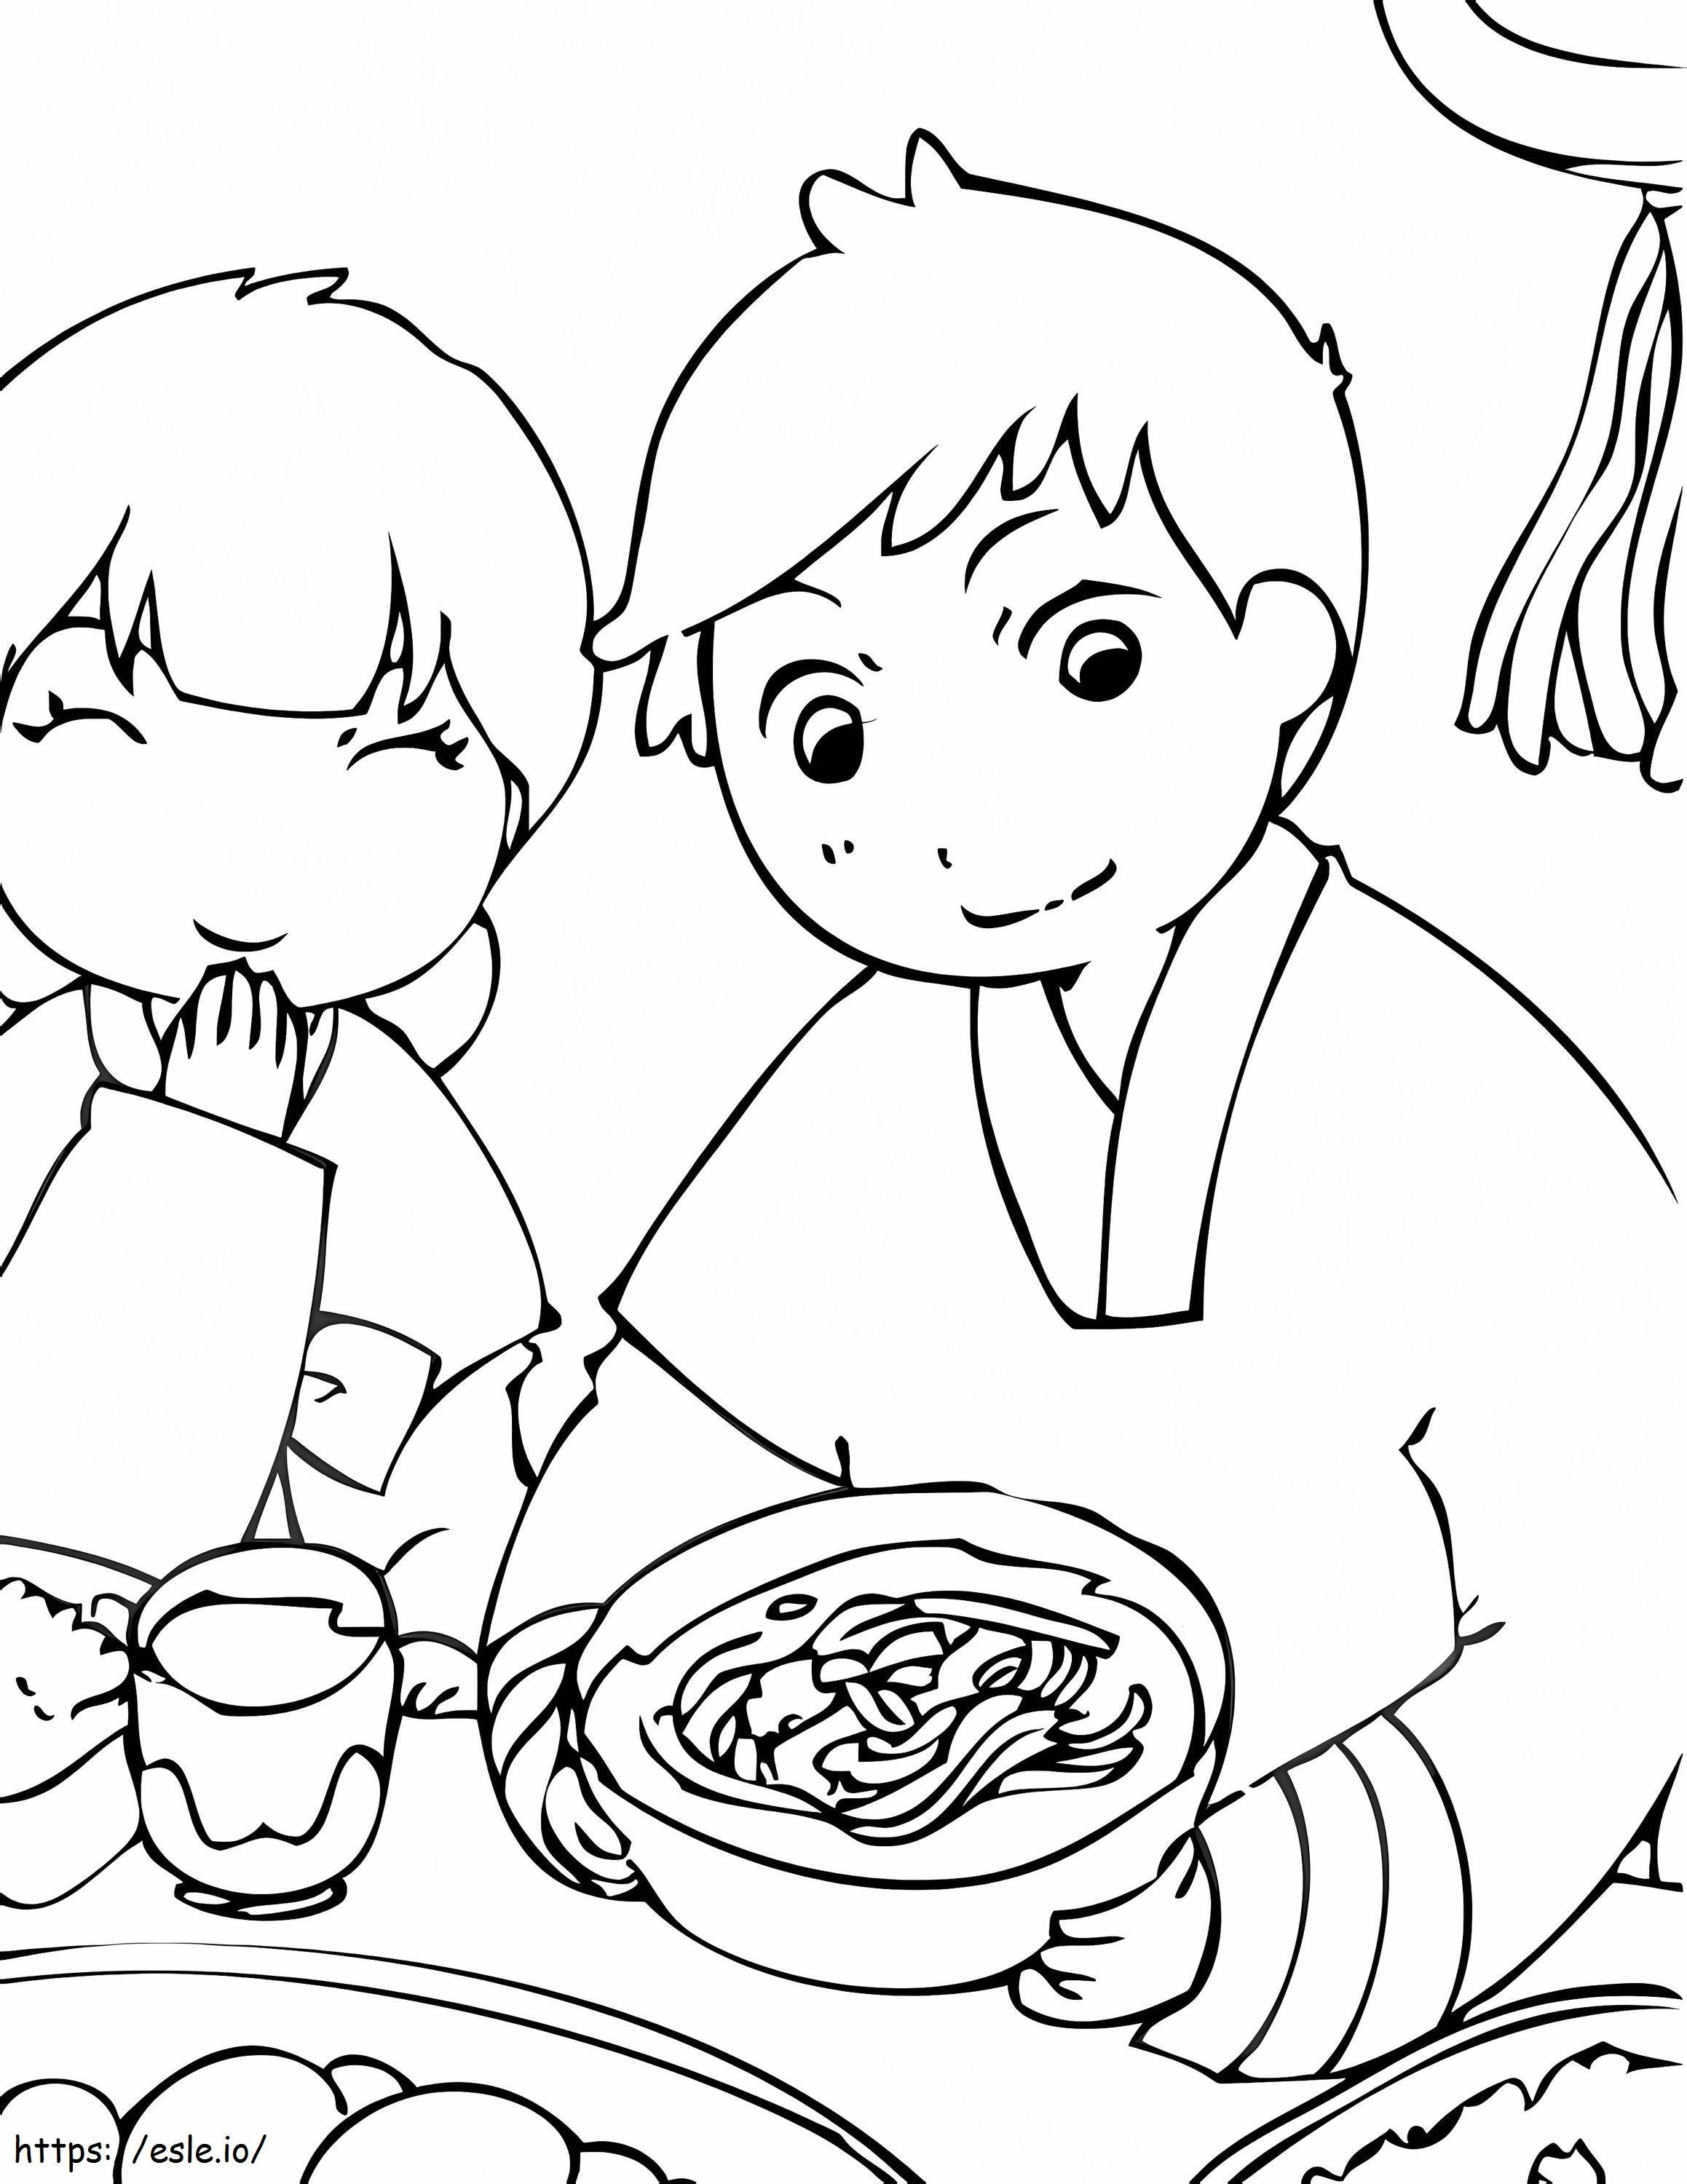 South Korean coloring page